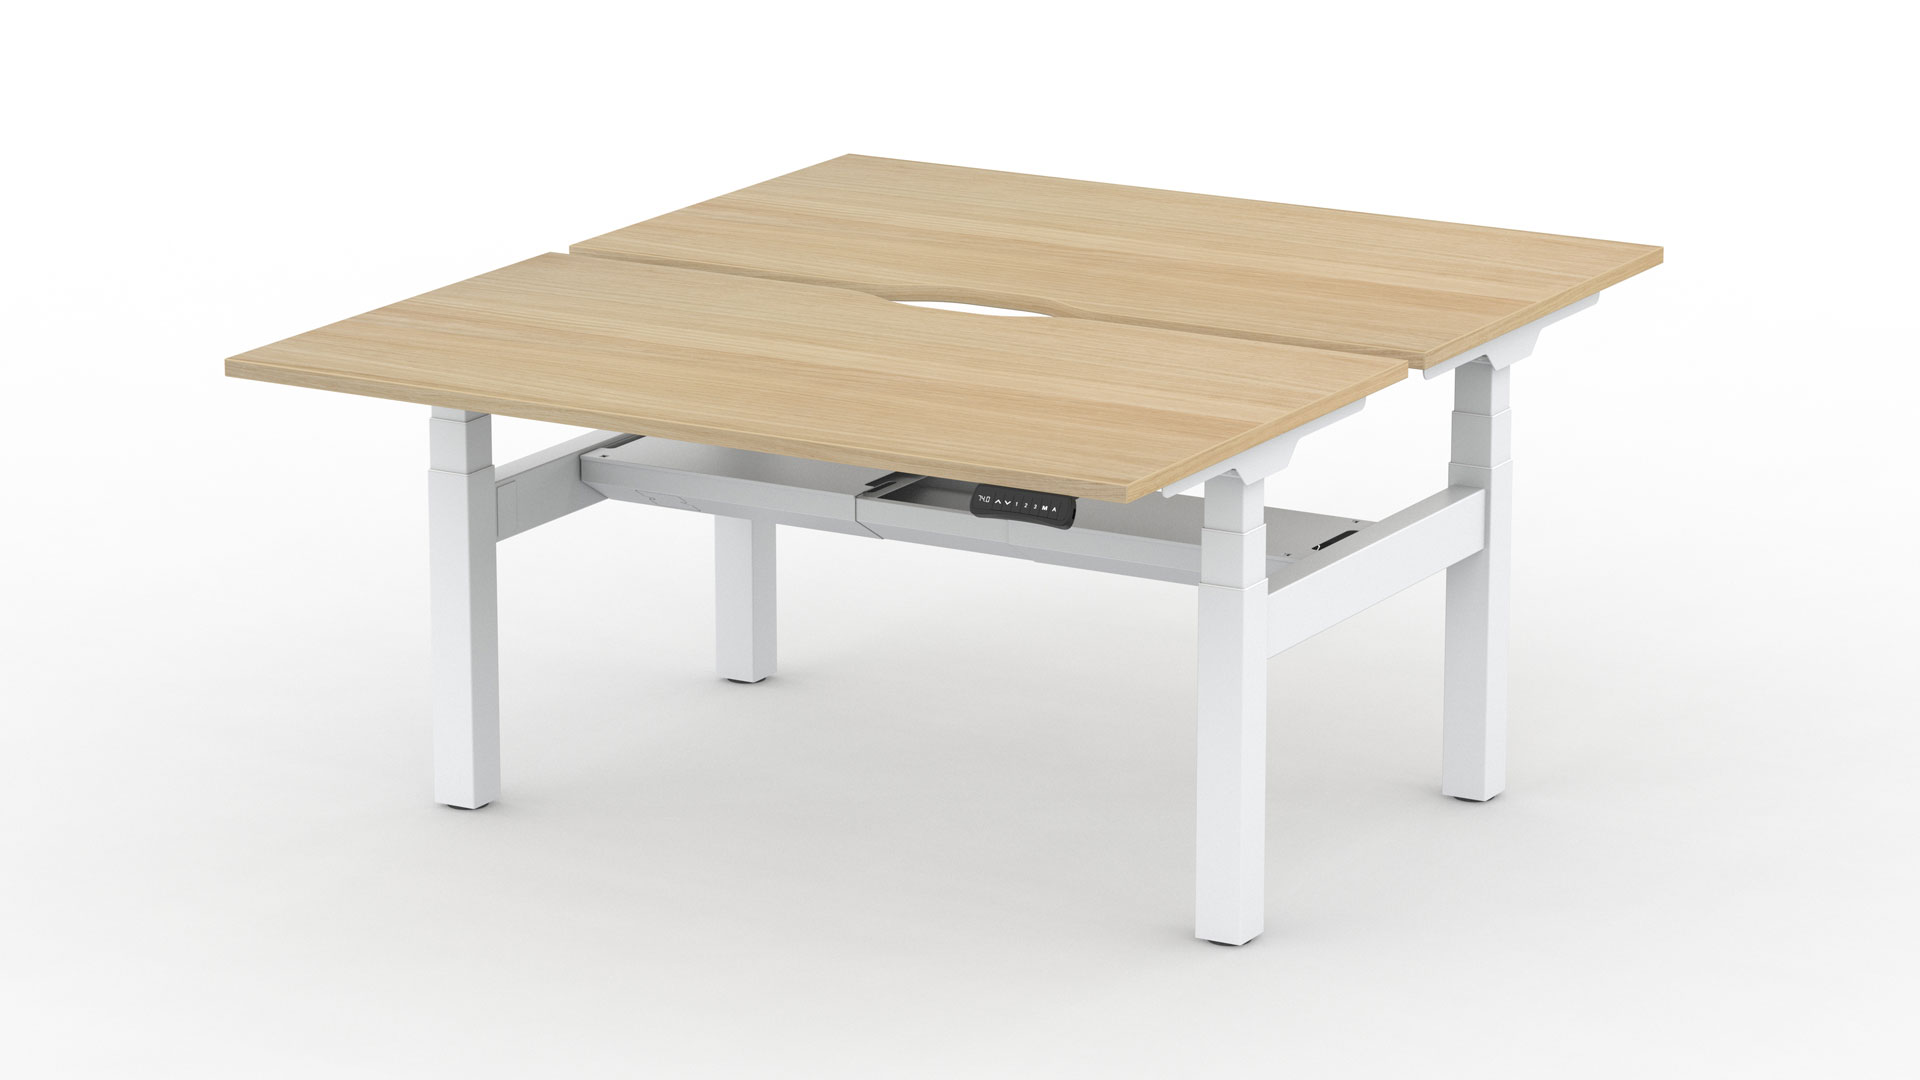 Multiple desktop finishes are available for Alto 2 standing desk benches